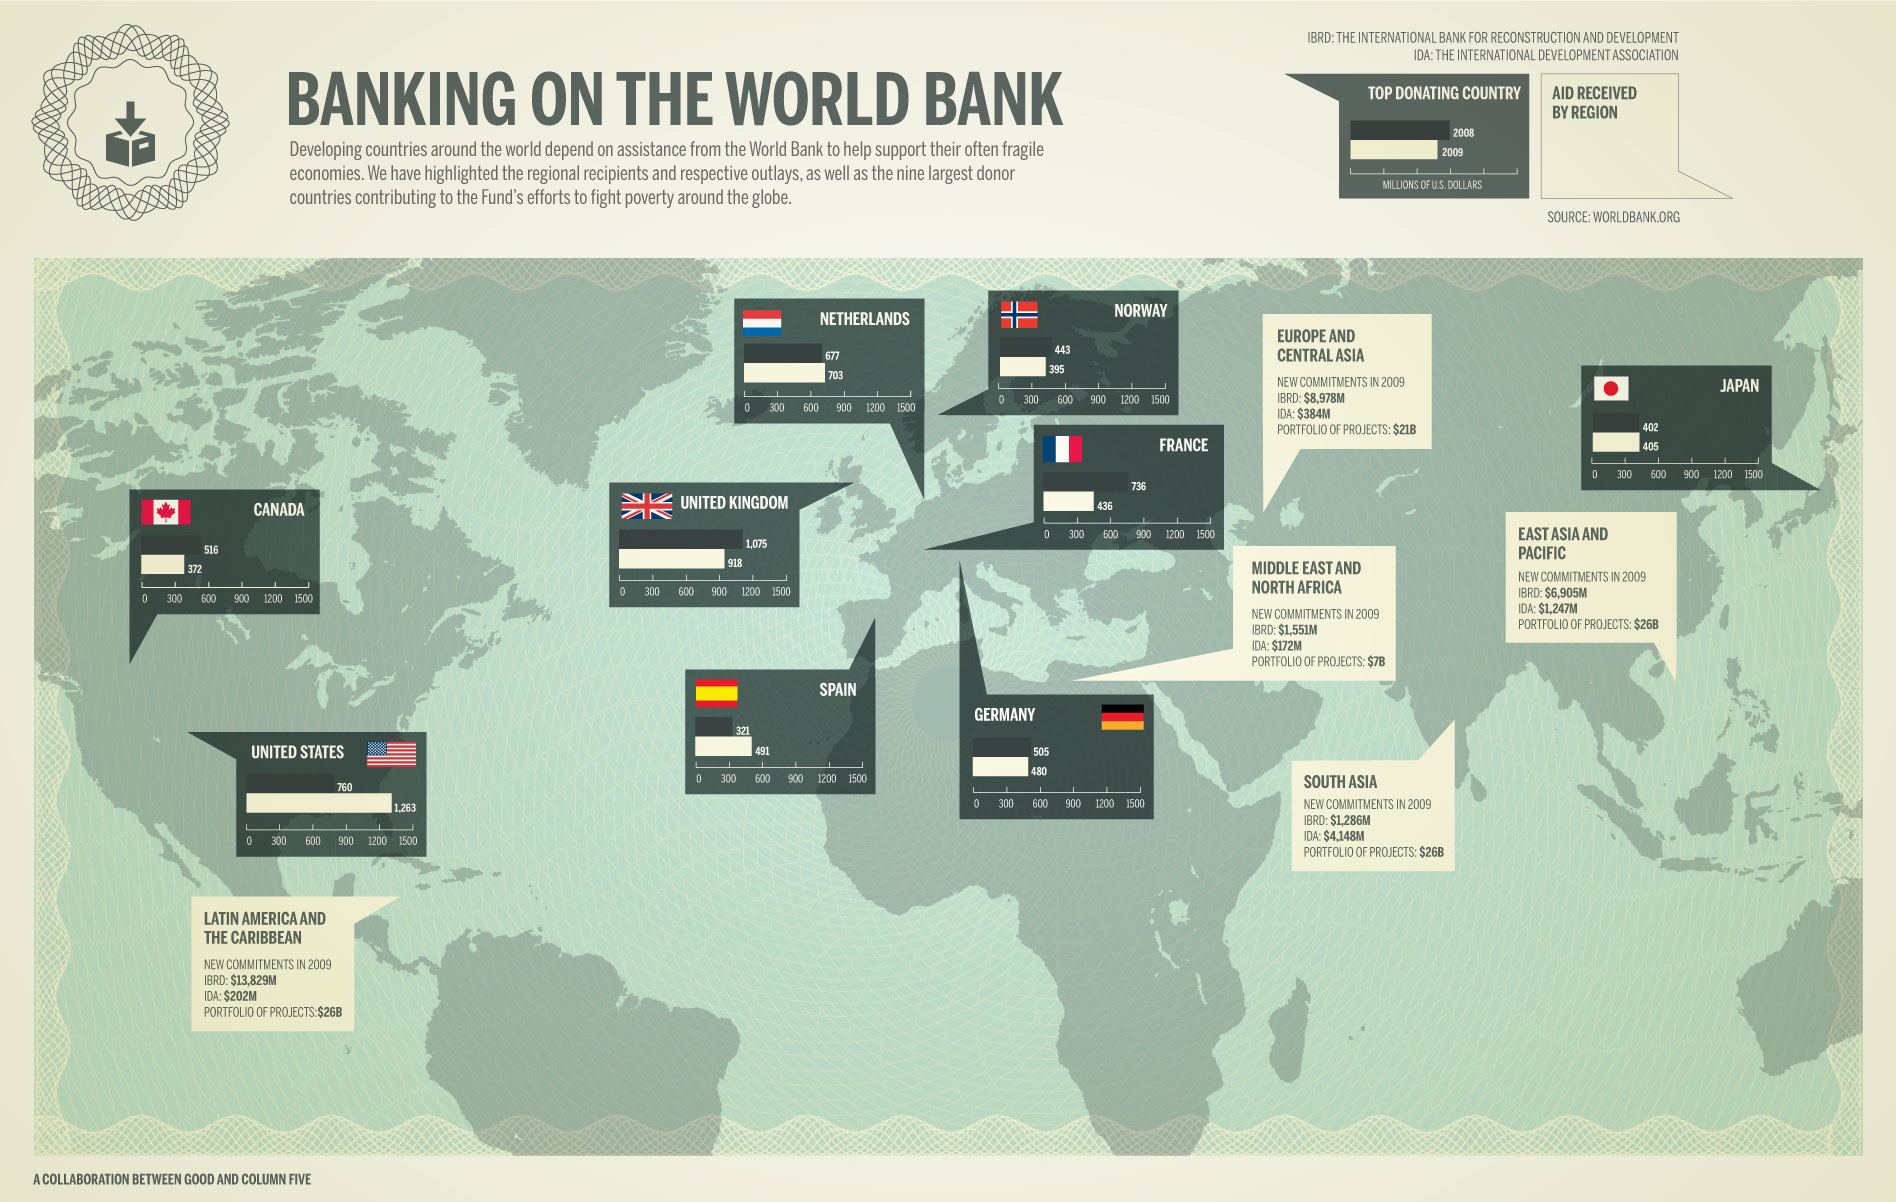 Banking on the world bank shows that each countries around the world are depending on its assistance to help them support their often fragile economies.